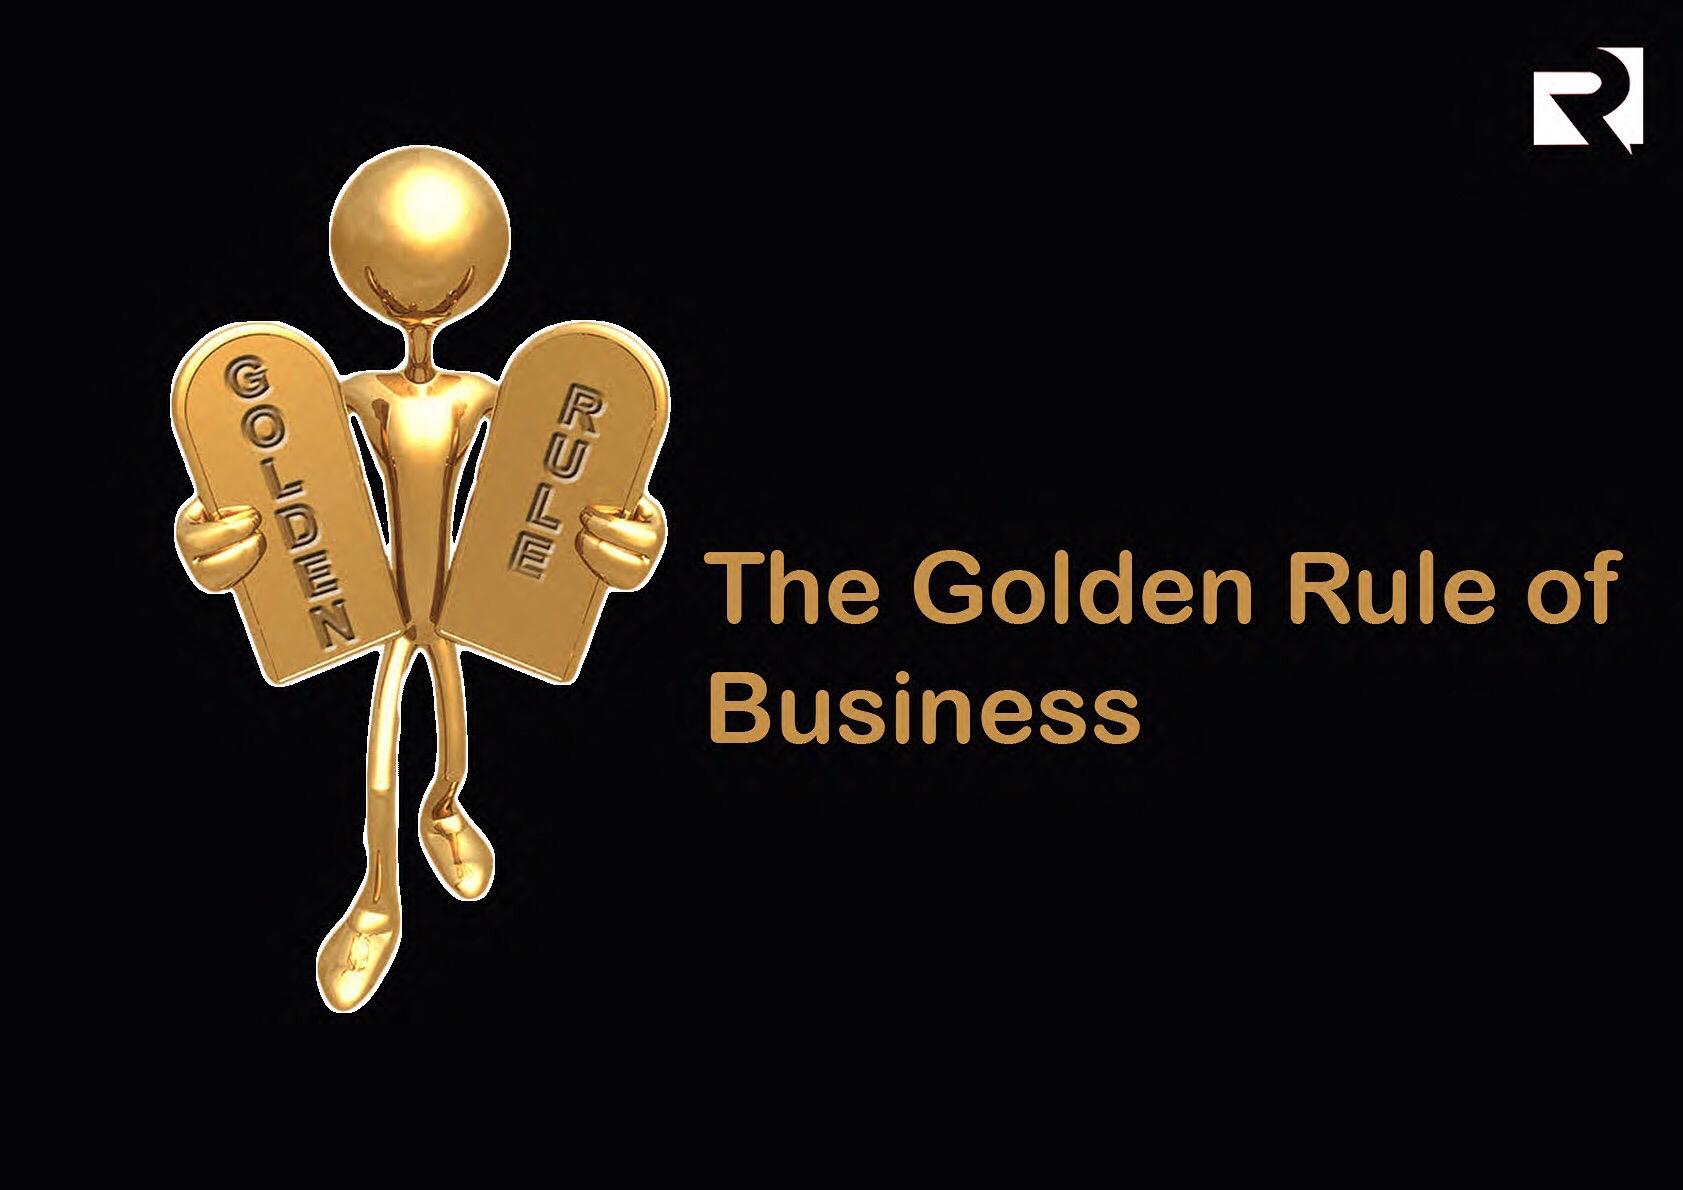 The Golden Rule of Business